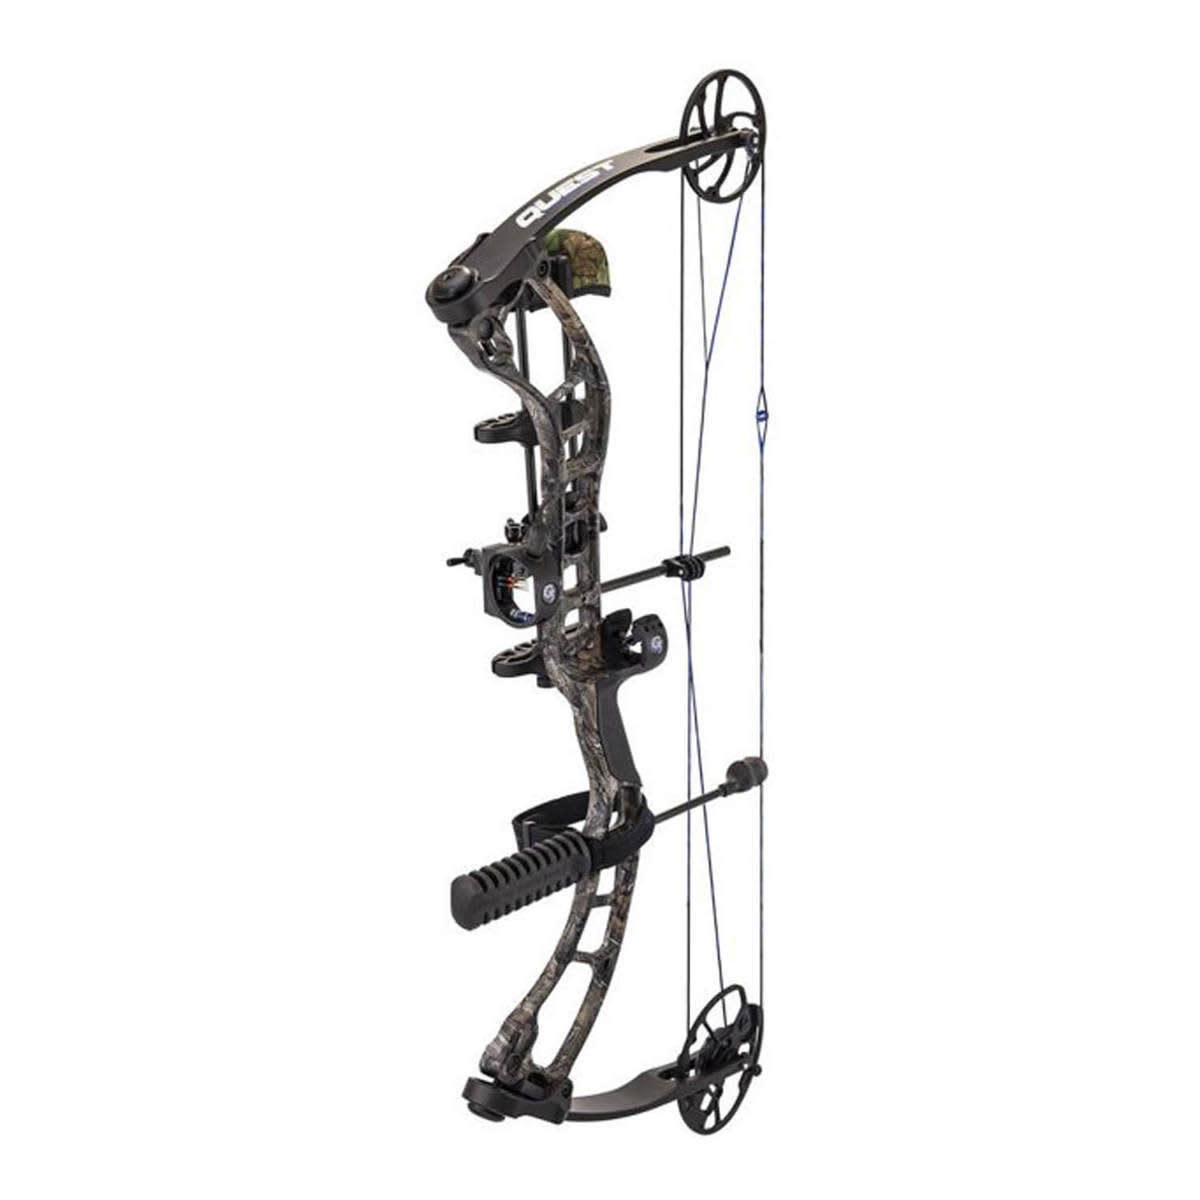 Quest Forge Realtree Xtra Compound Bow - Save $200!